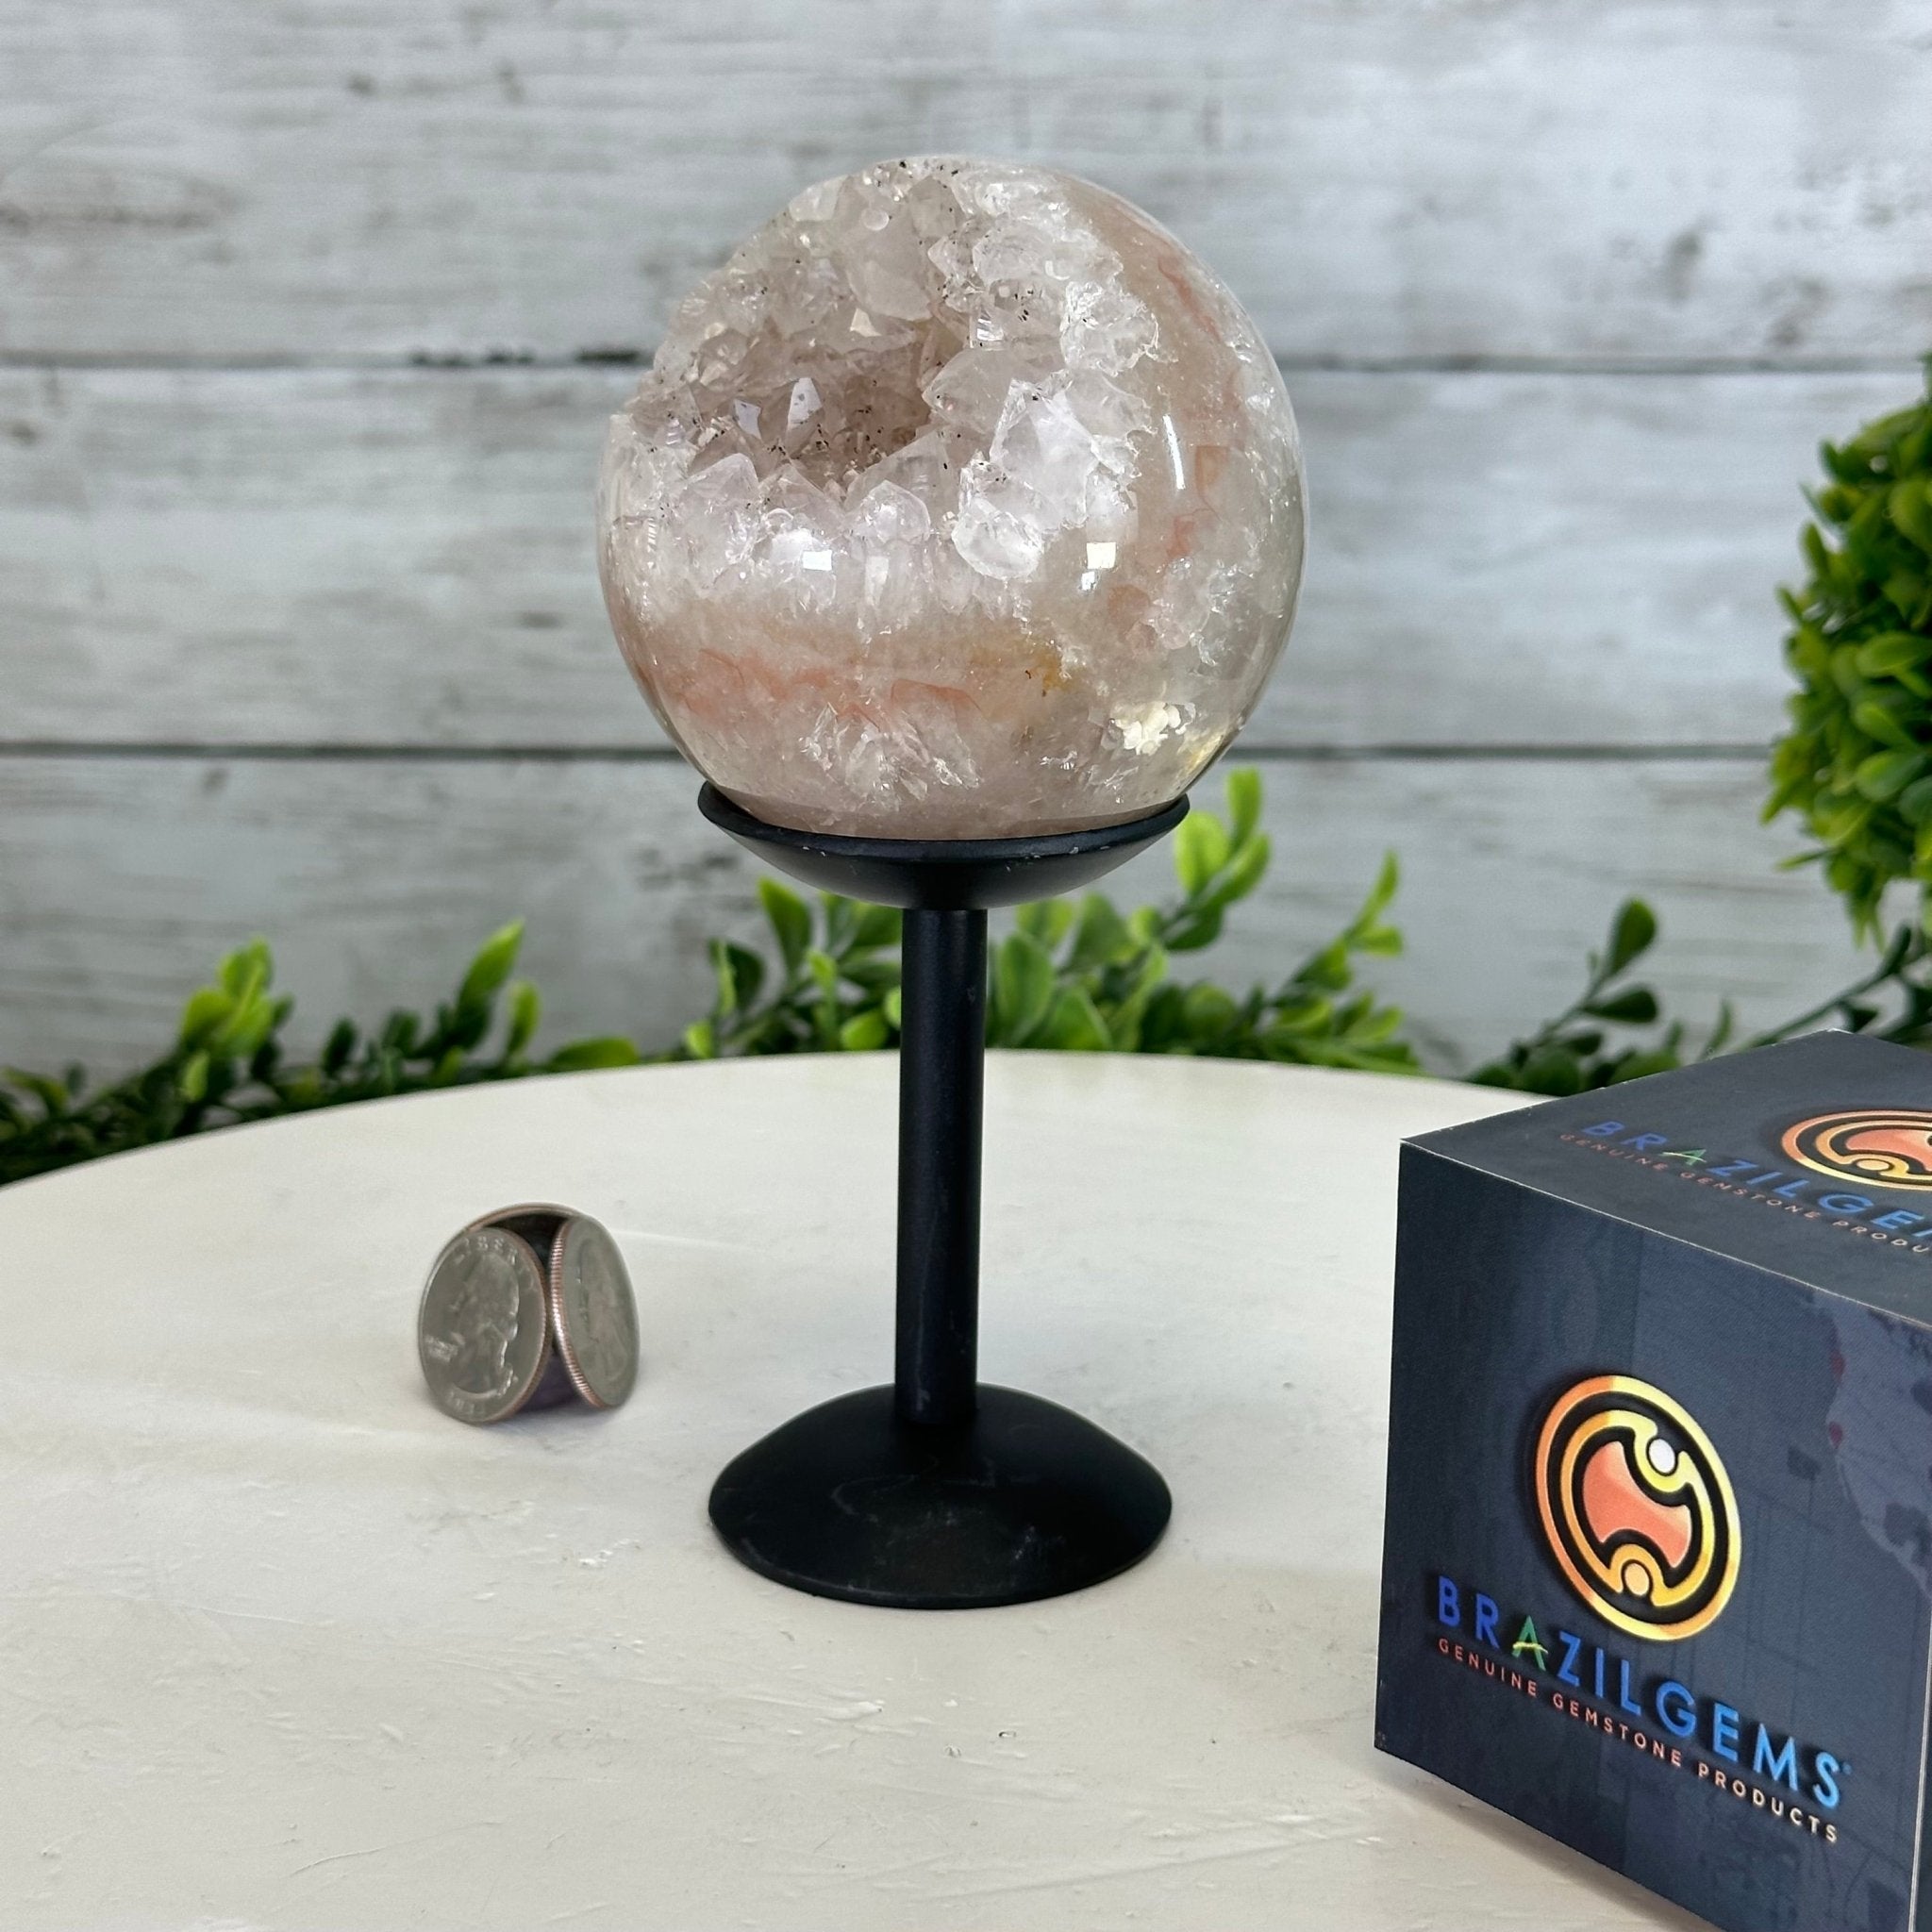 Druzy White Amethyst Sphere on a Metal Stand, 1.2 lbs & 6.2" Tall #5630-0040 - Brazil GemsBrazil GemsDruzy White Amethyst Sphere on a Metal Stand, 1.2 lbs & 6.2" Tall #5630-0040Spheres5630-0040